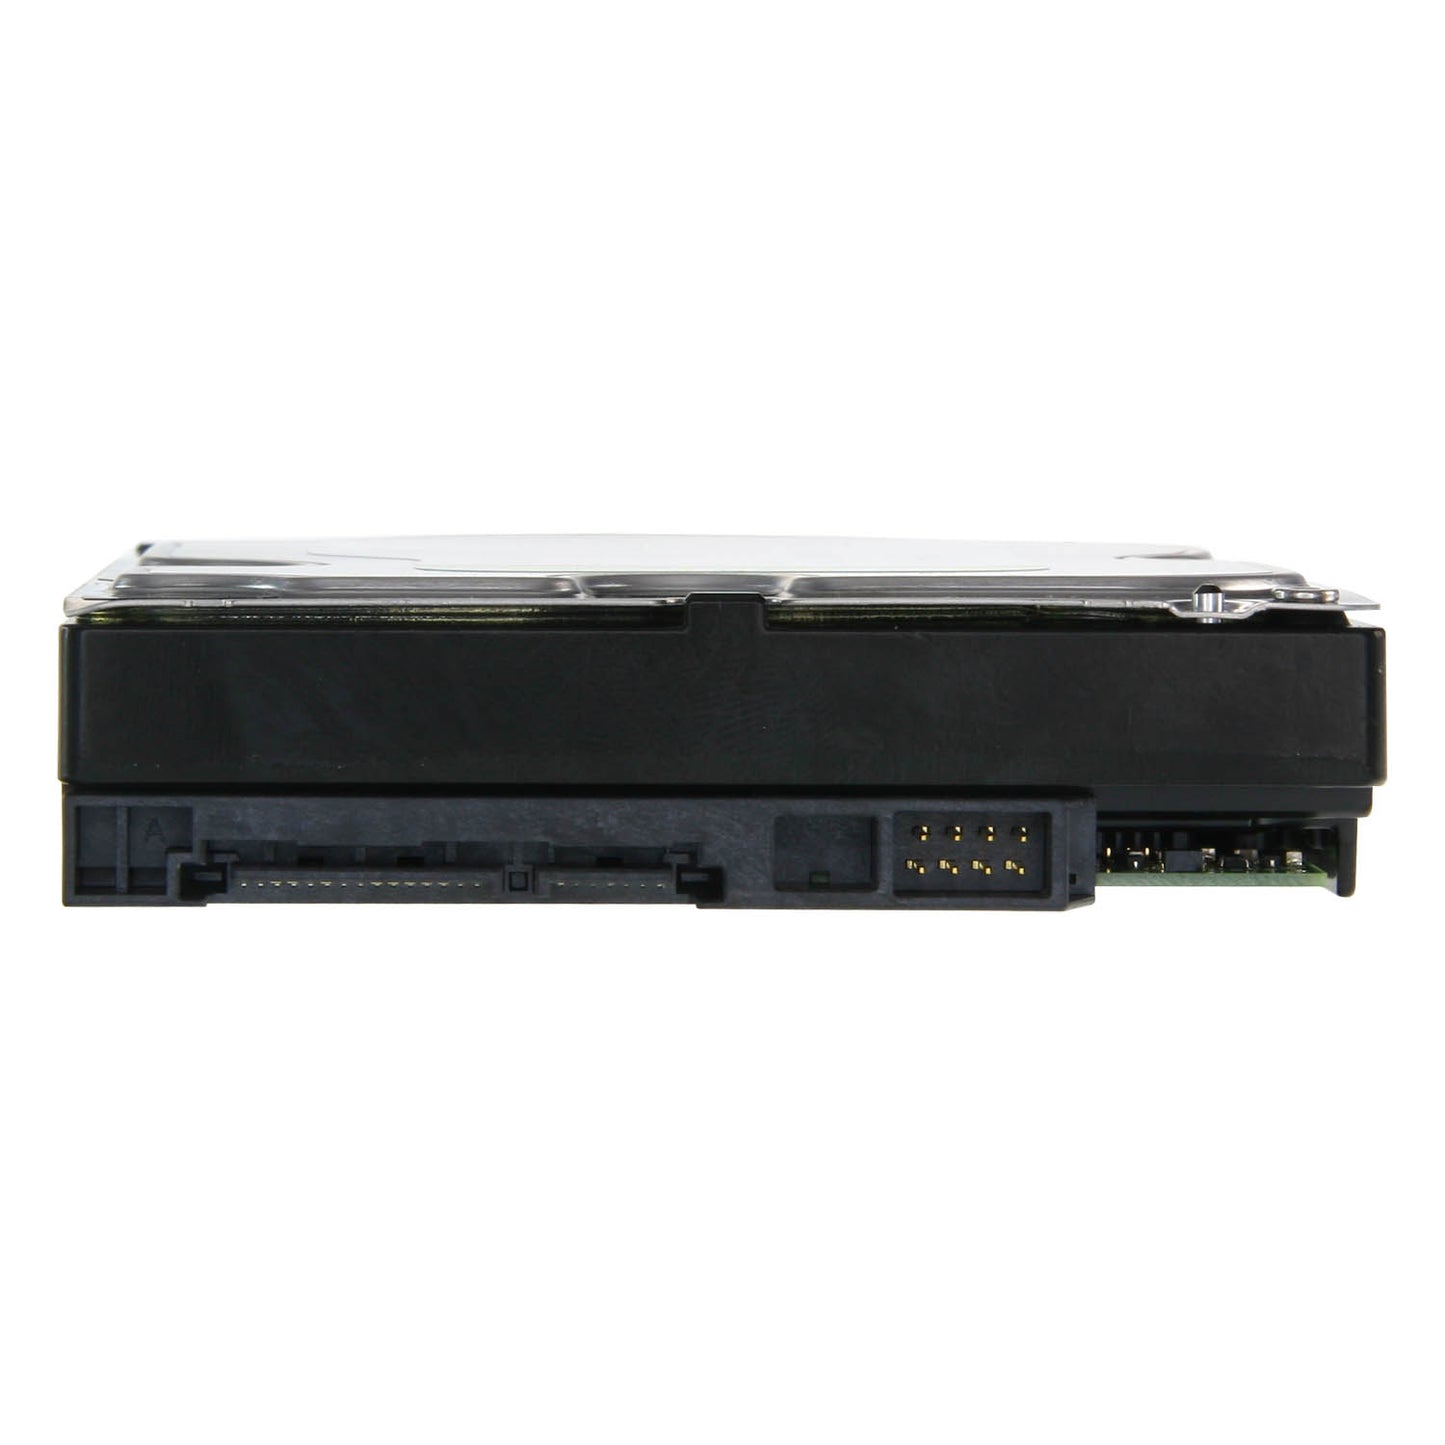 Hard Disk - 3 TB capacity - SATA 6 GB/s interface - Model WD30PURX - Special for video recorders - Alone or installed on DVR